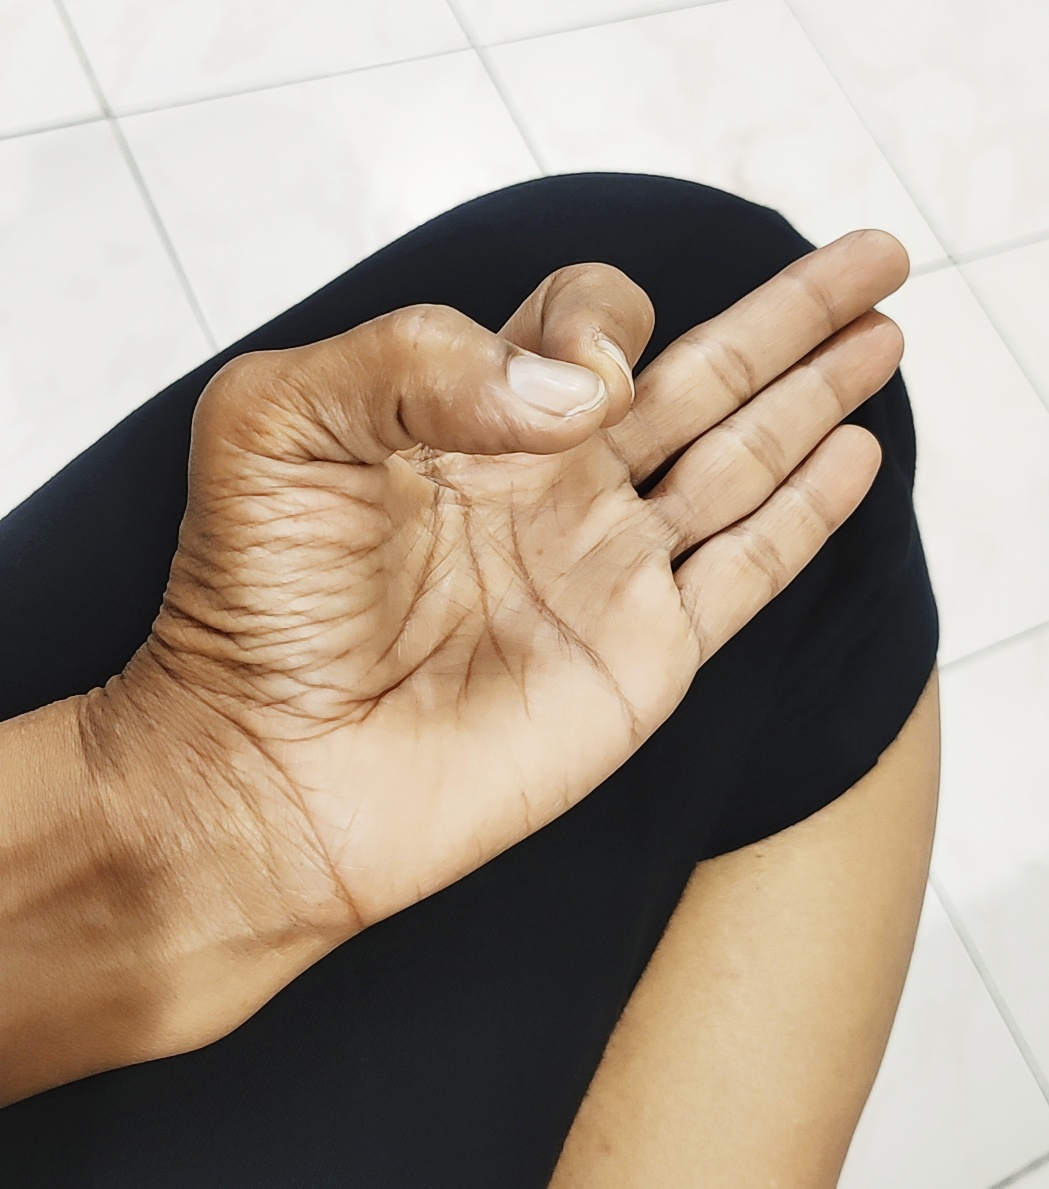 Place The left hand in 'Chin Mudra" as shown here to practice  Alternate Nostril Breathing (Anulom - Vilom Pranayama). This pranayama is highly recommended for lung health and for former smokers. 